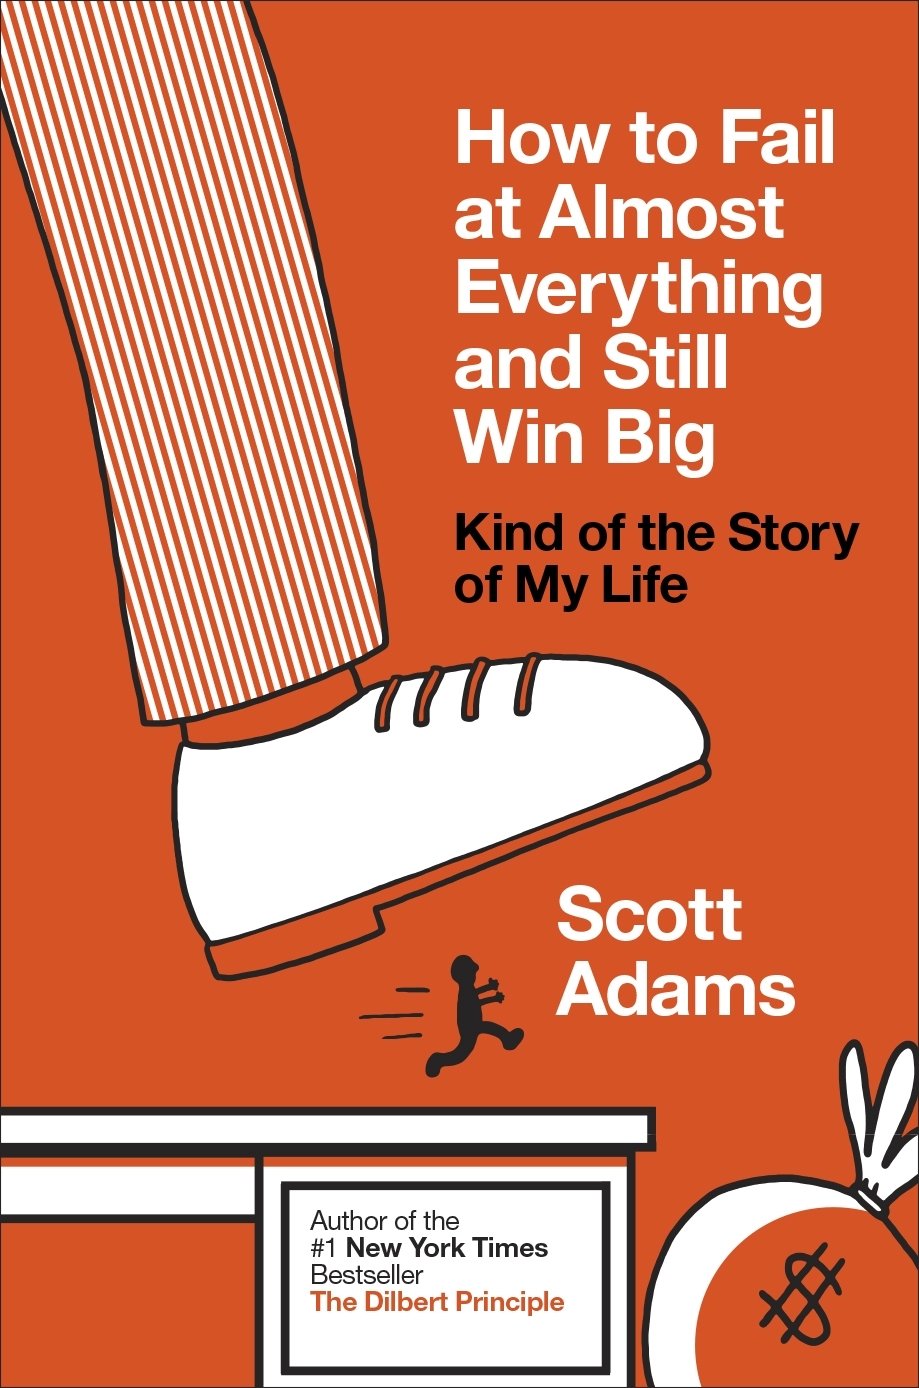 How to Fail at Almost Everything and Still Win Big: Kind of the Story of My Life  Scott Adams